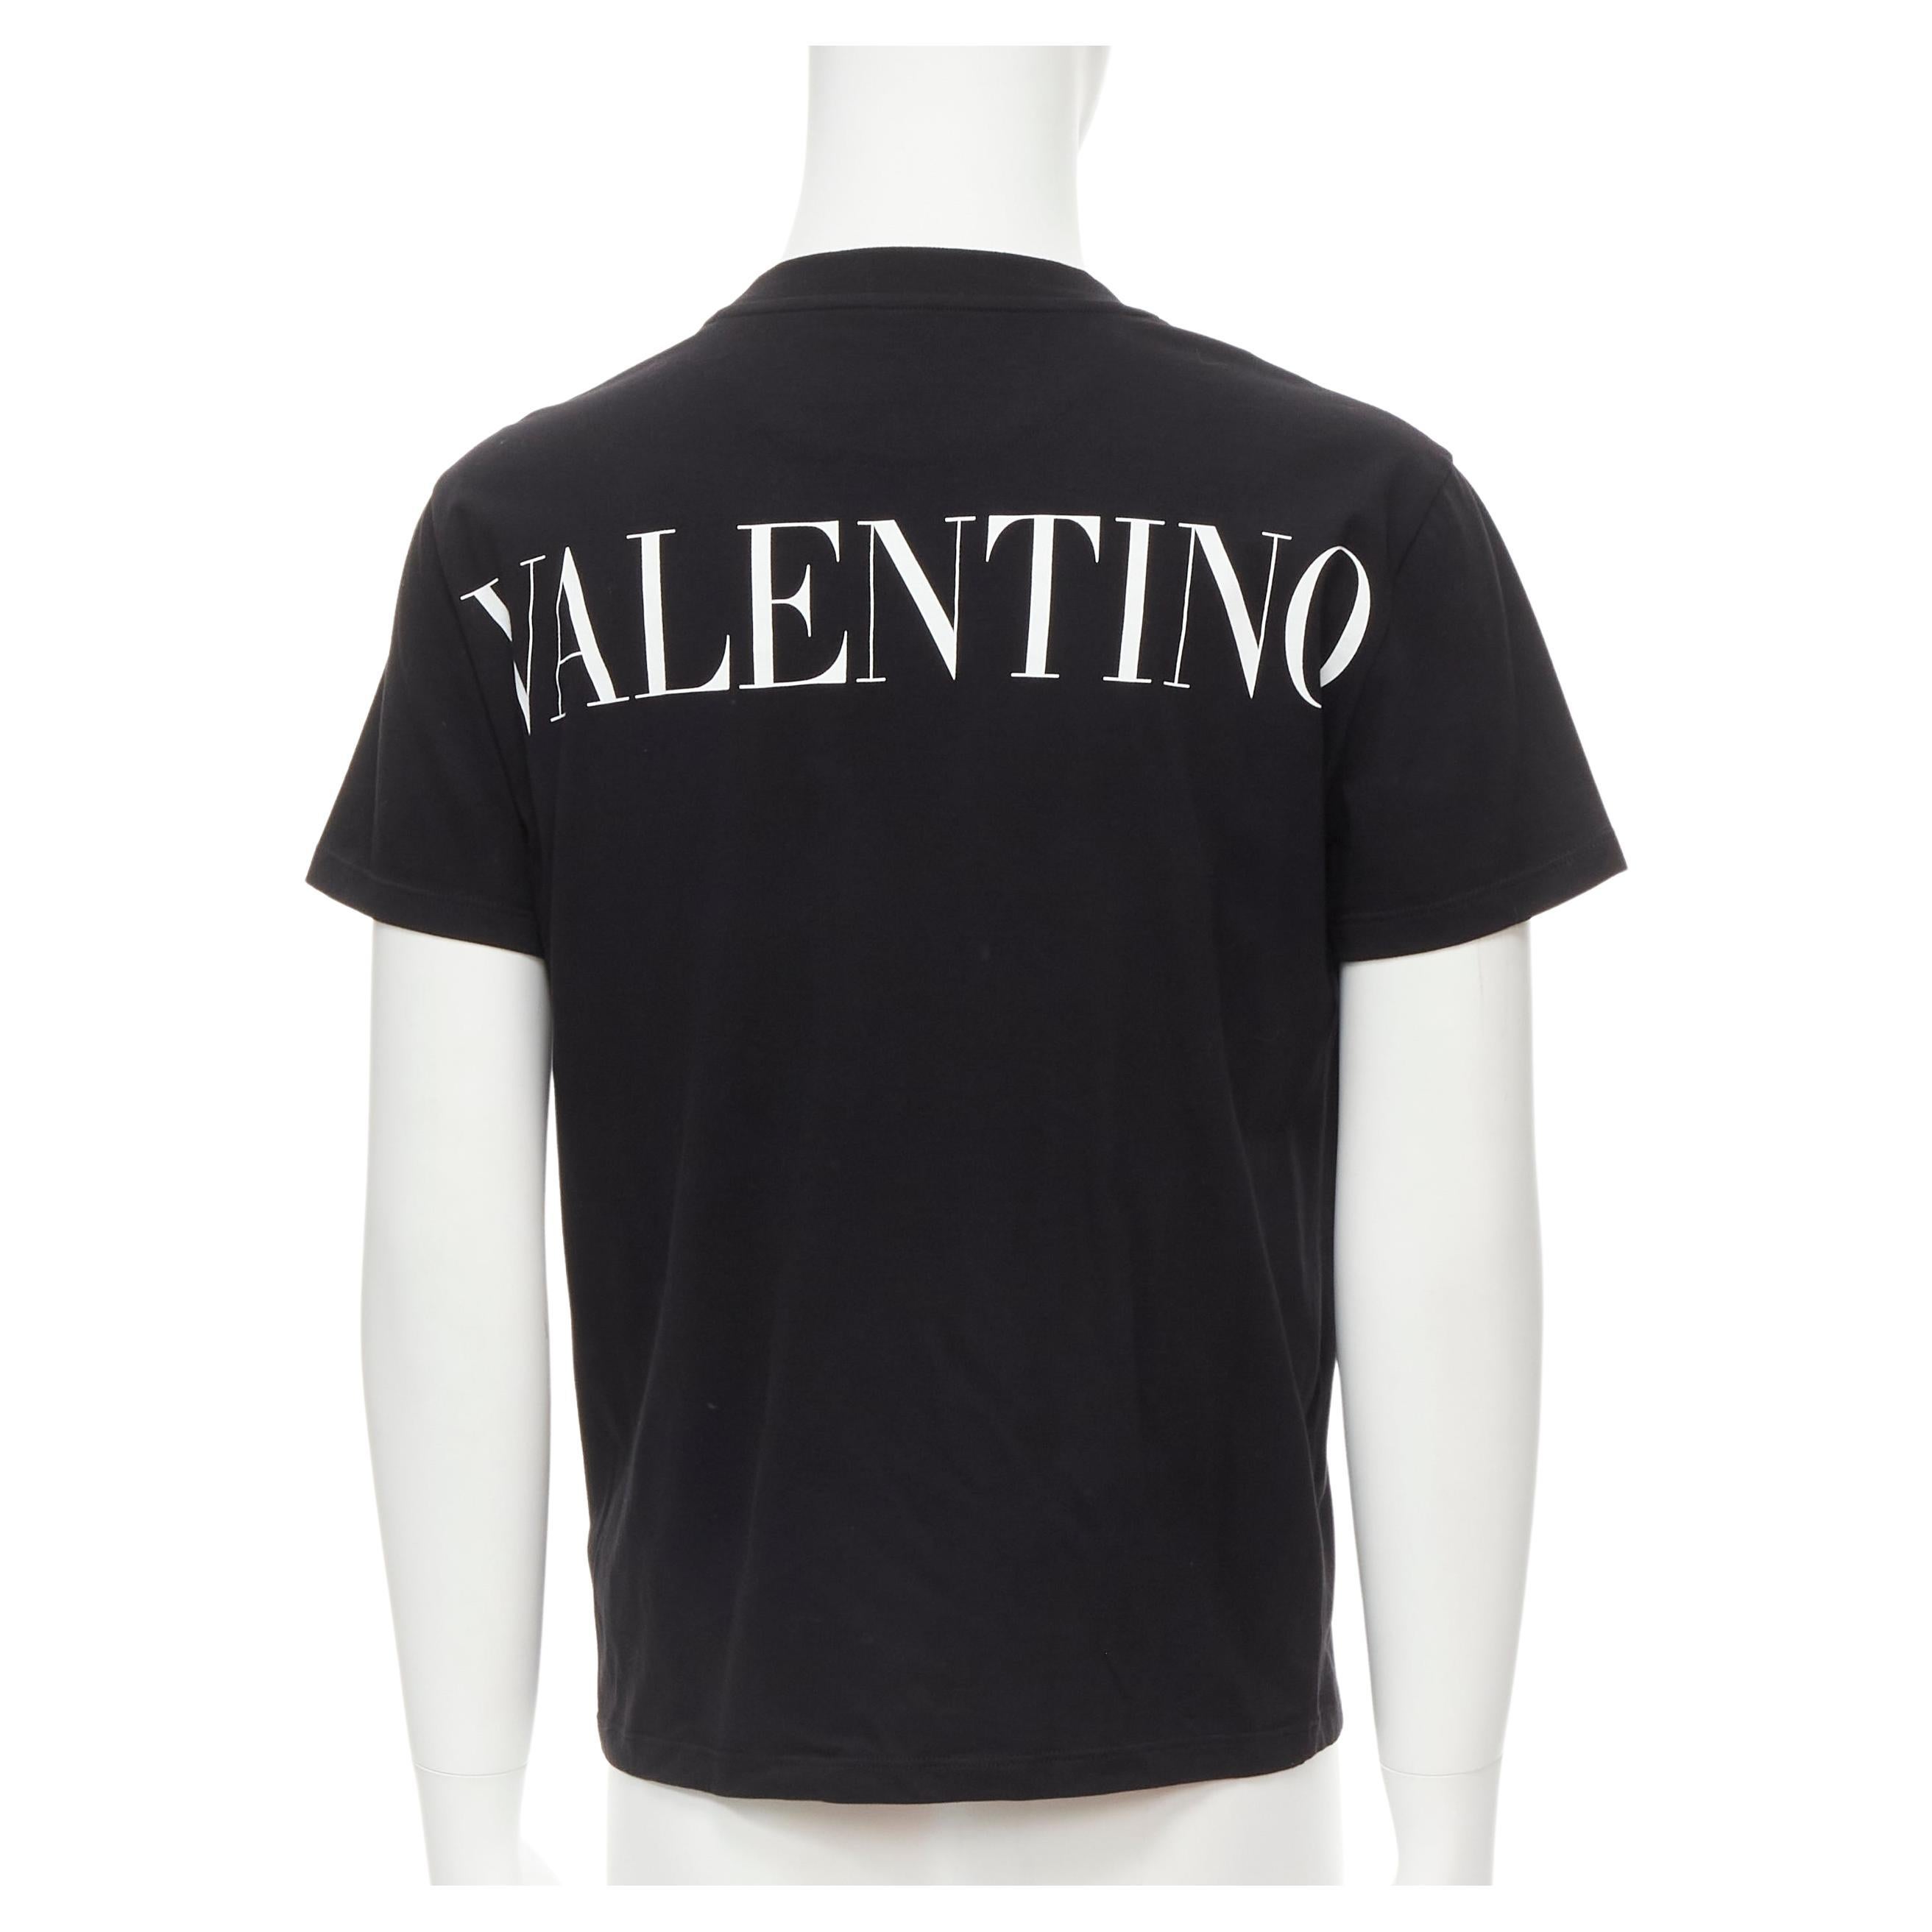 VALENTINO floral lace breast pocket white logo black cotton tshirt S For Sale